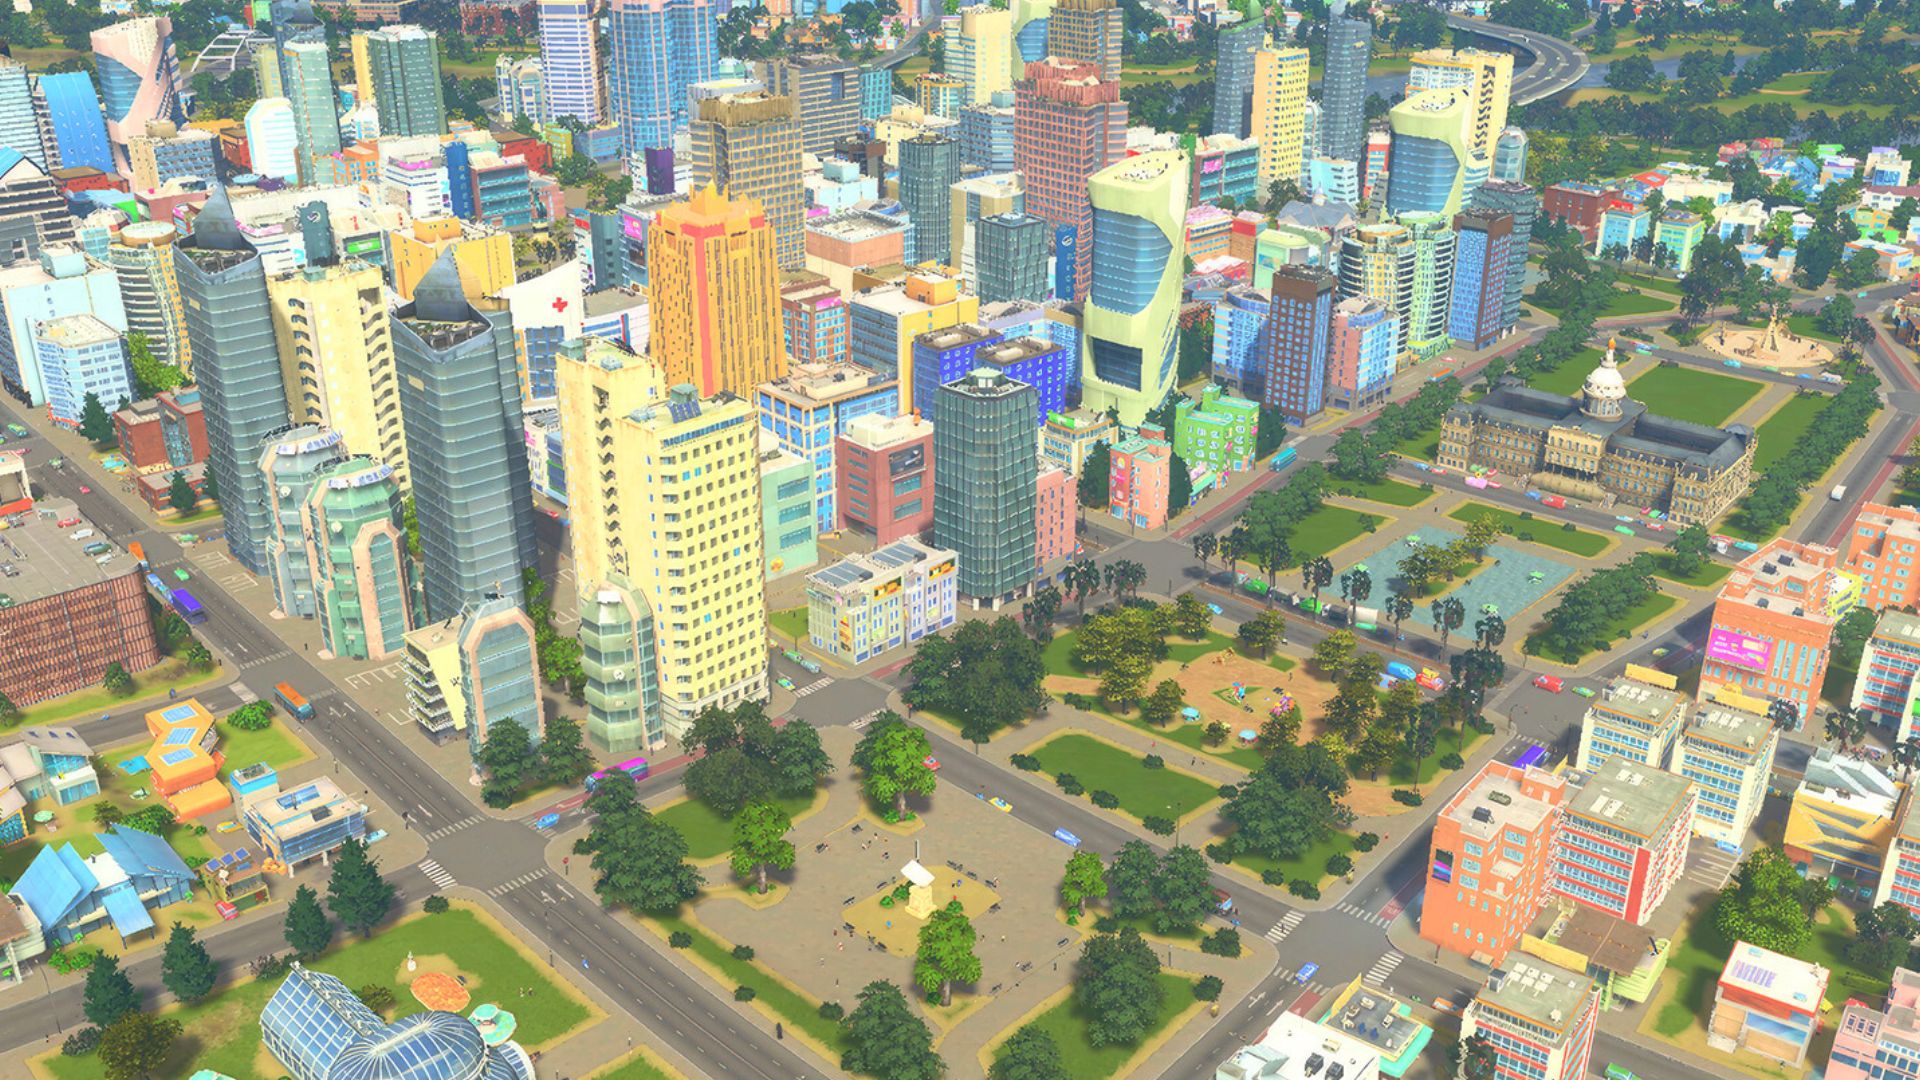 Prepare yourselves, the final Cities Skylines DLCs have been revealed